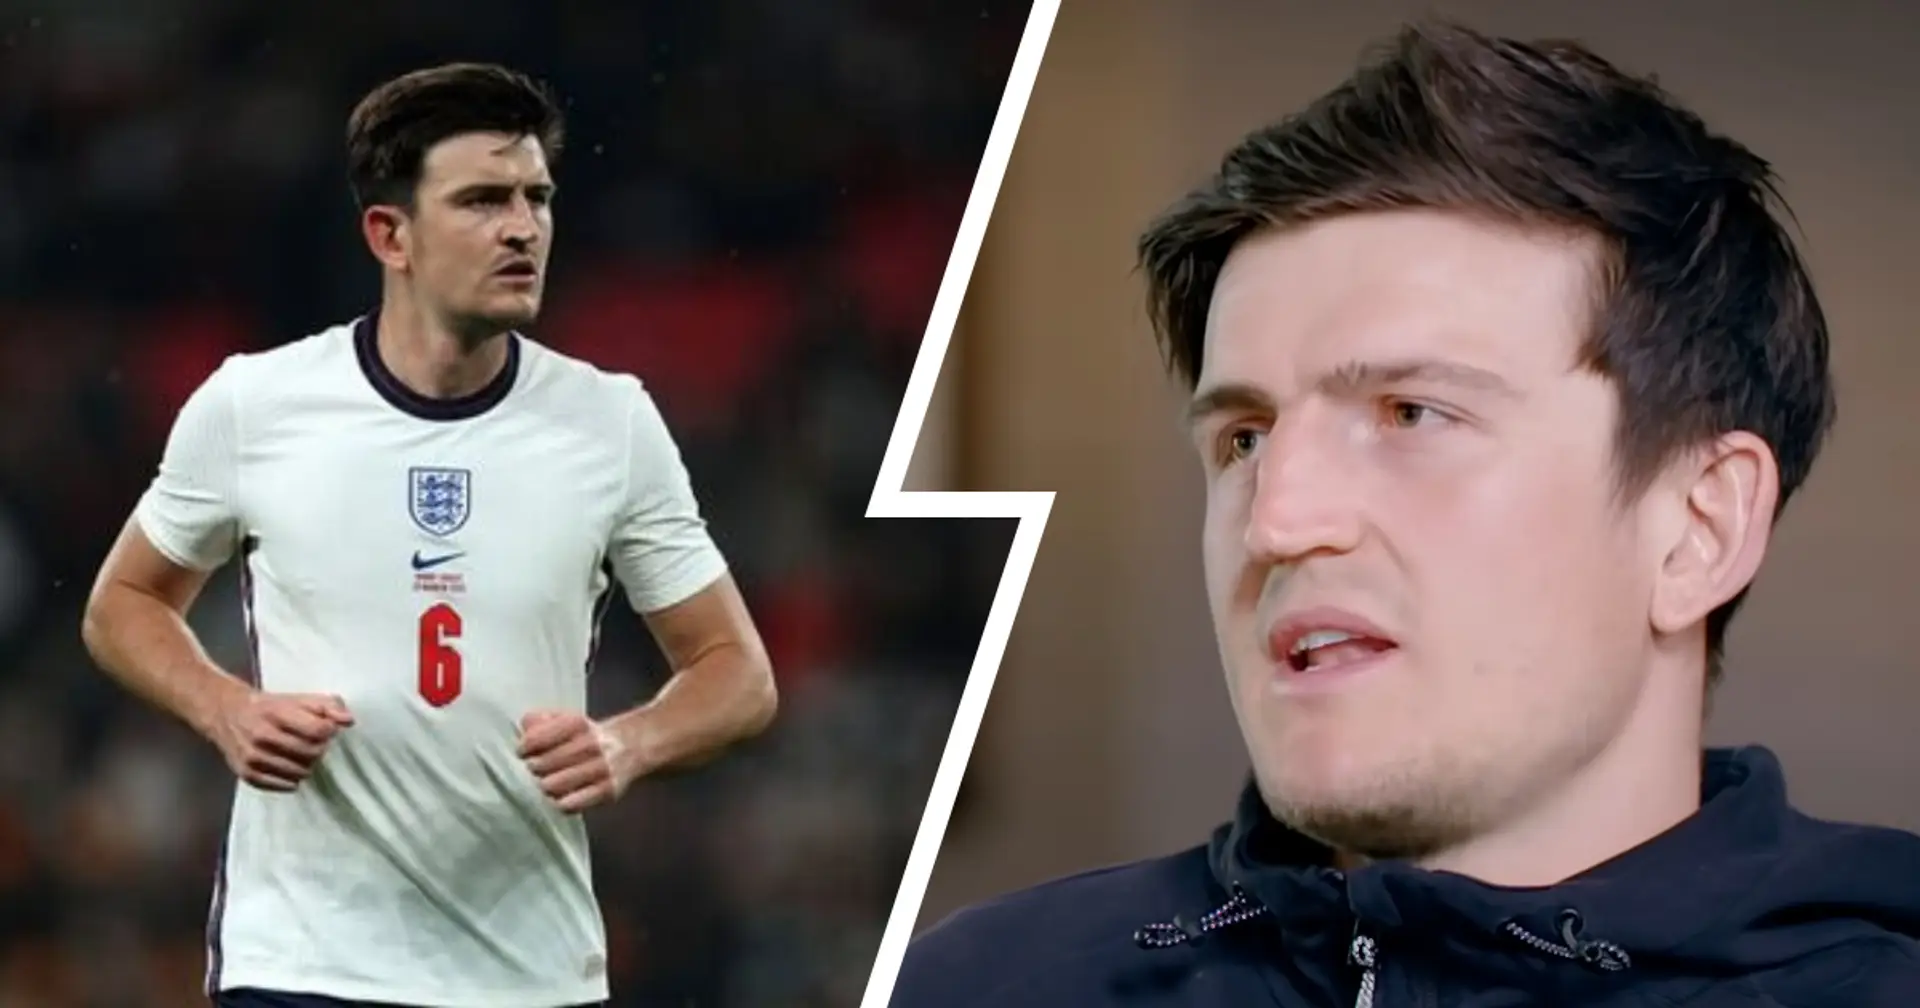 'I was a bit shocked to be honest': Harry Maguire reveals how he reacted to being whistled at by fans